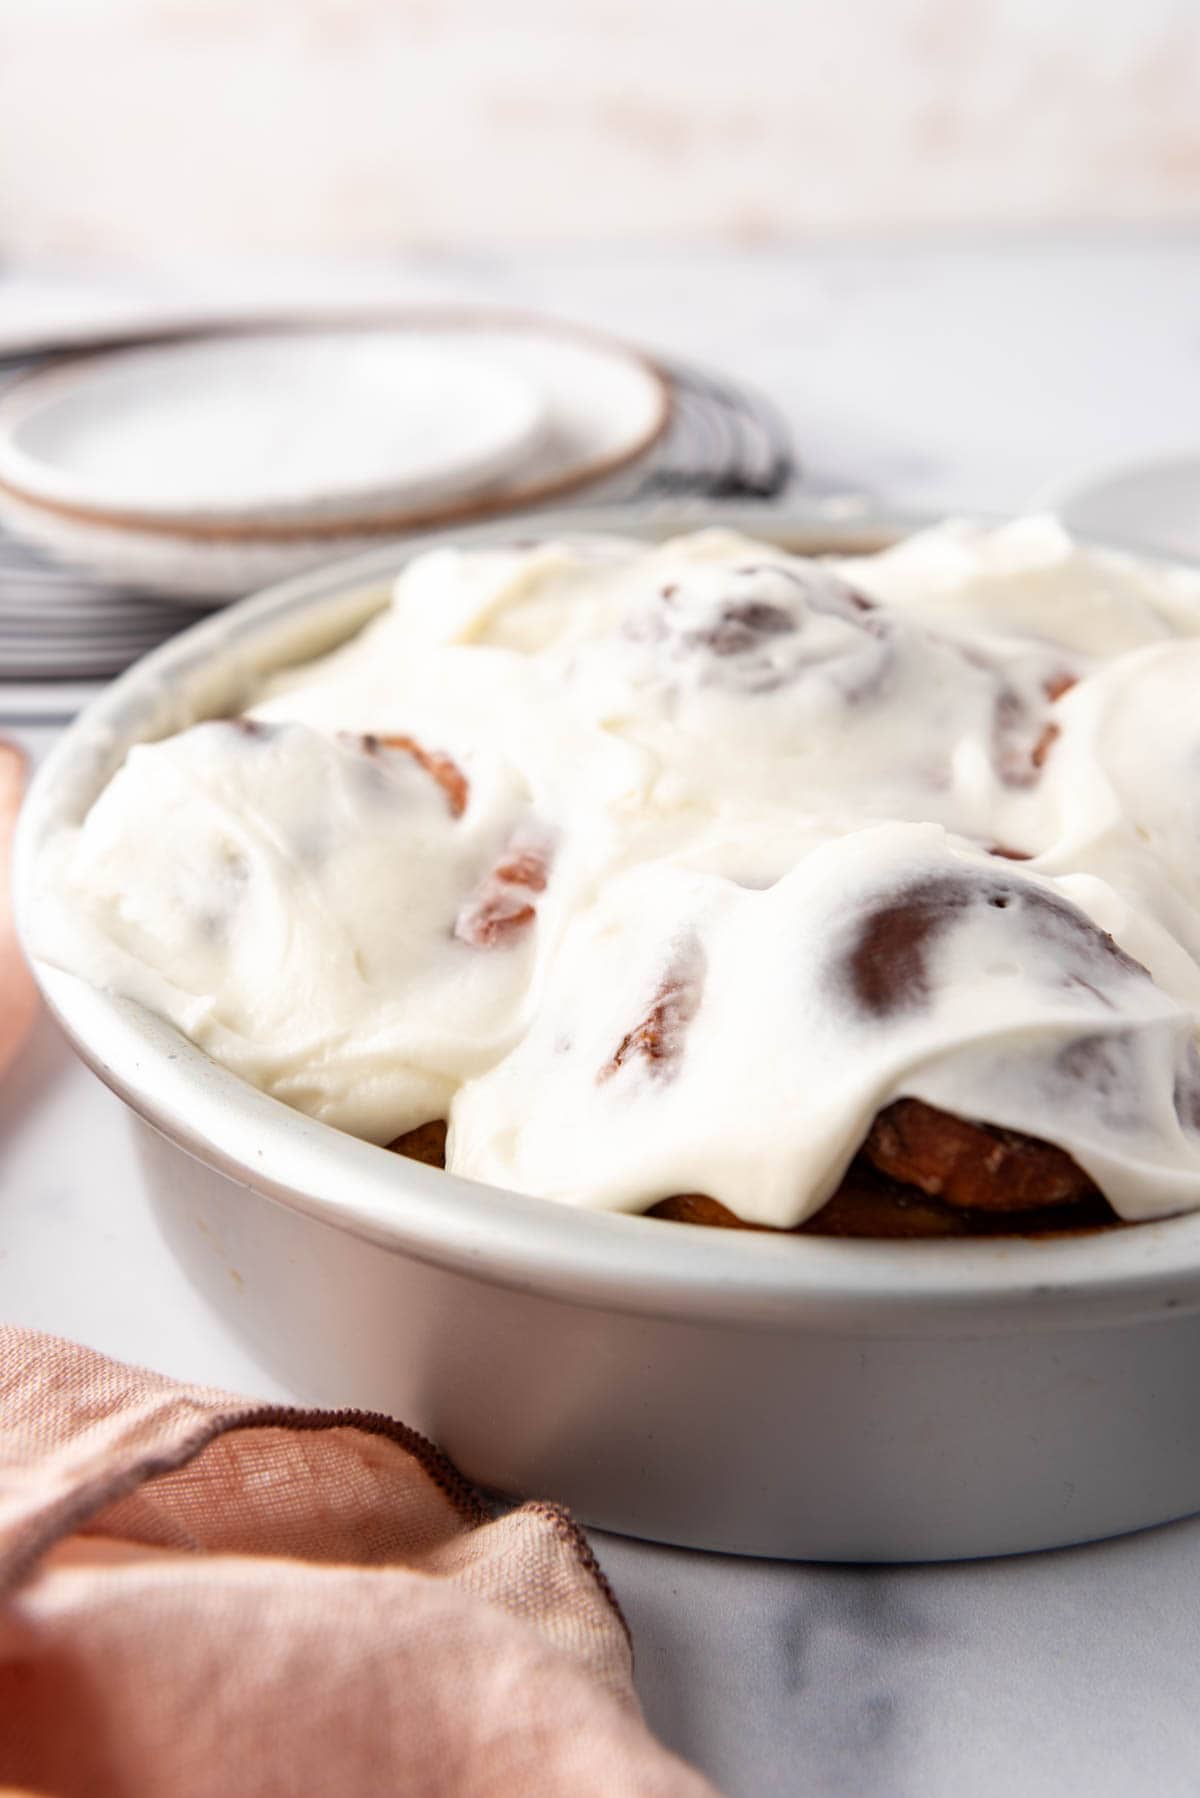 An image of frosted cinnamon rolls in a pan.